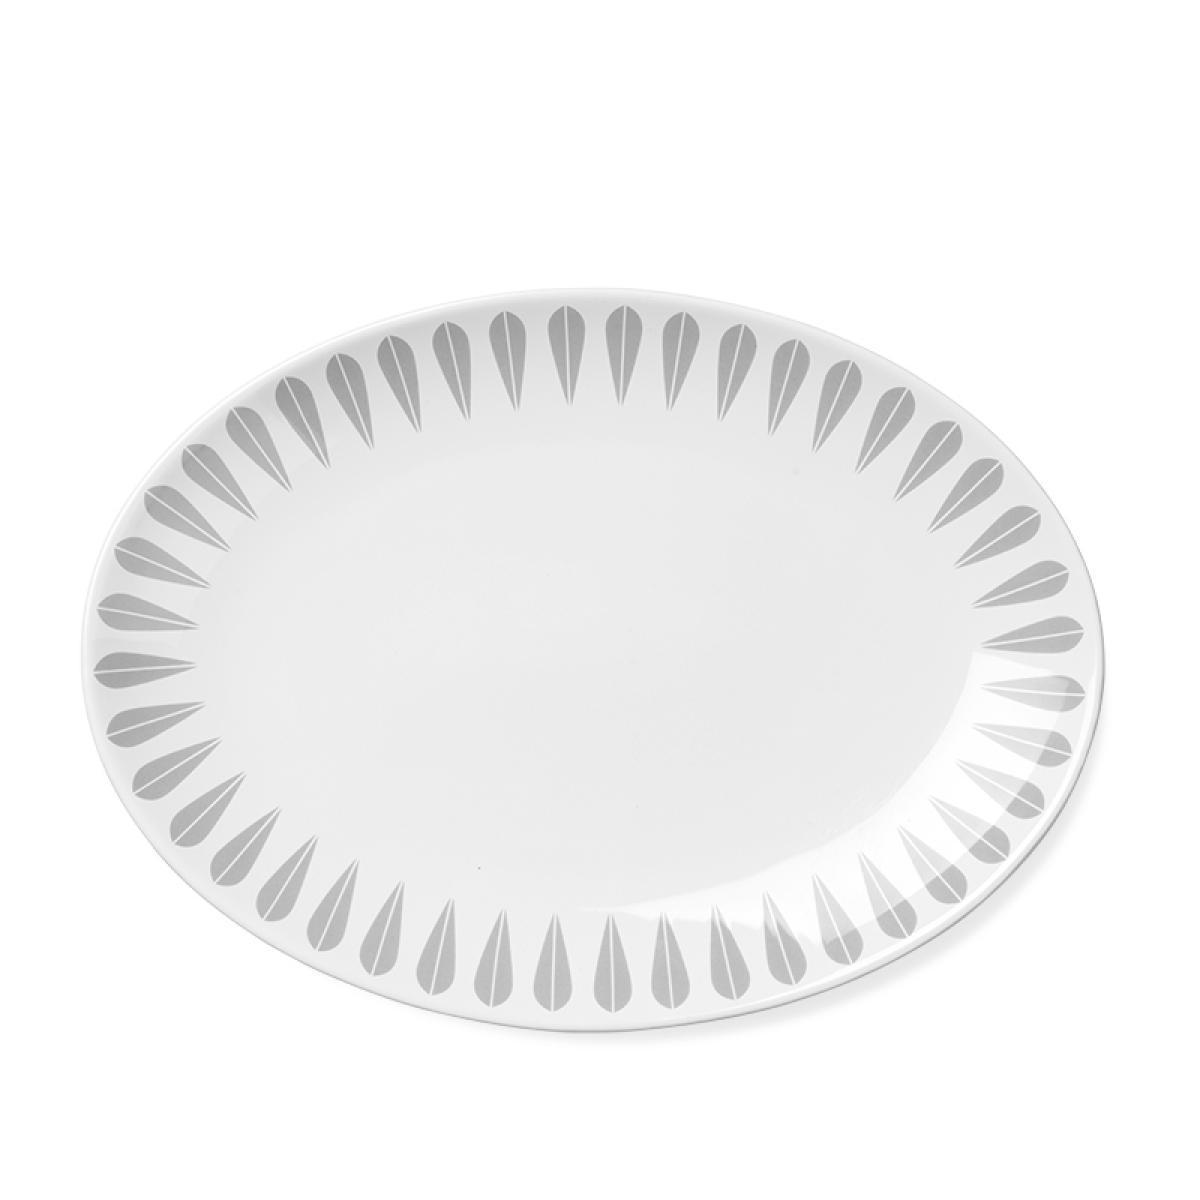 Lucie Kaas Arne Clausen Collection Serving Plate Gray, 34 cm